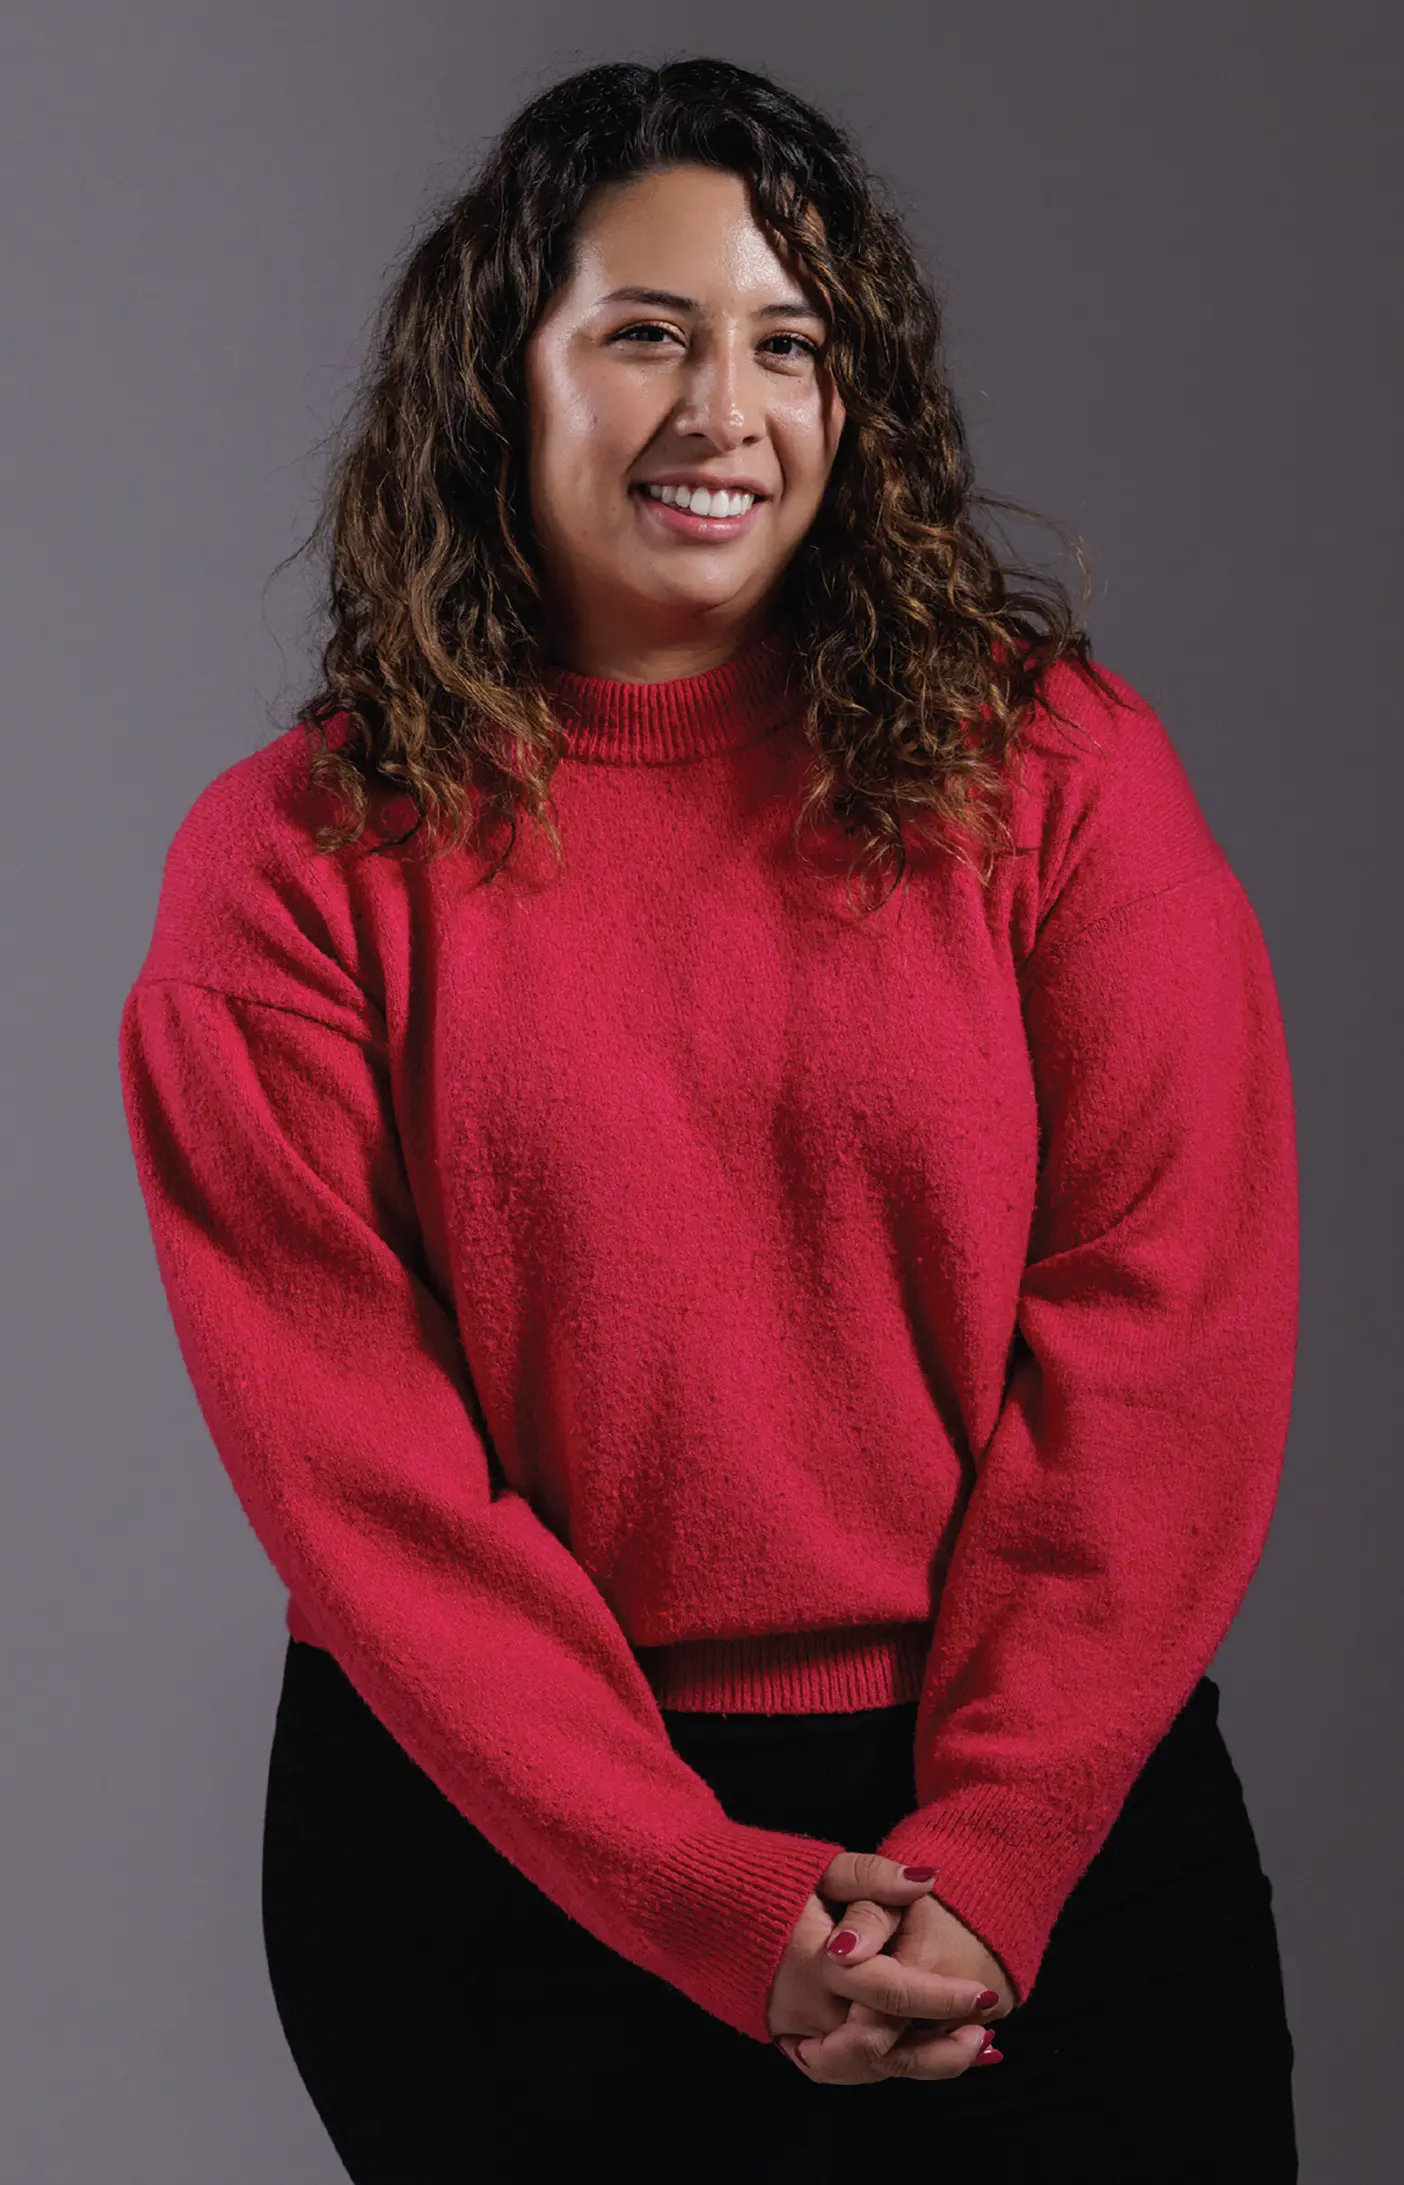 A woman poses in a red sweater